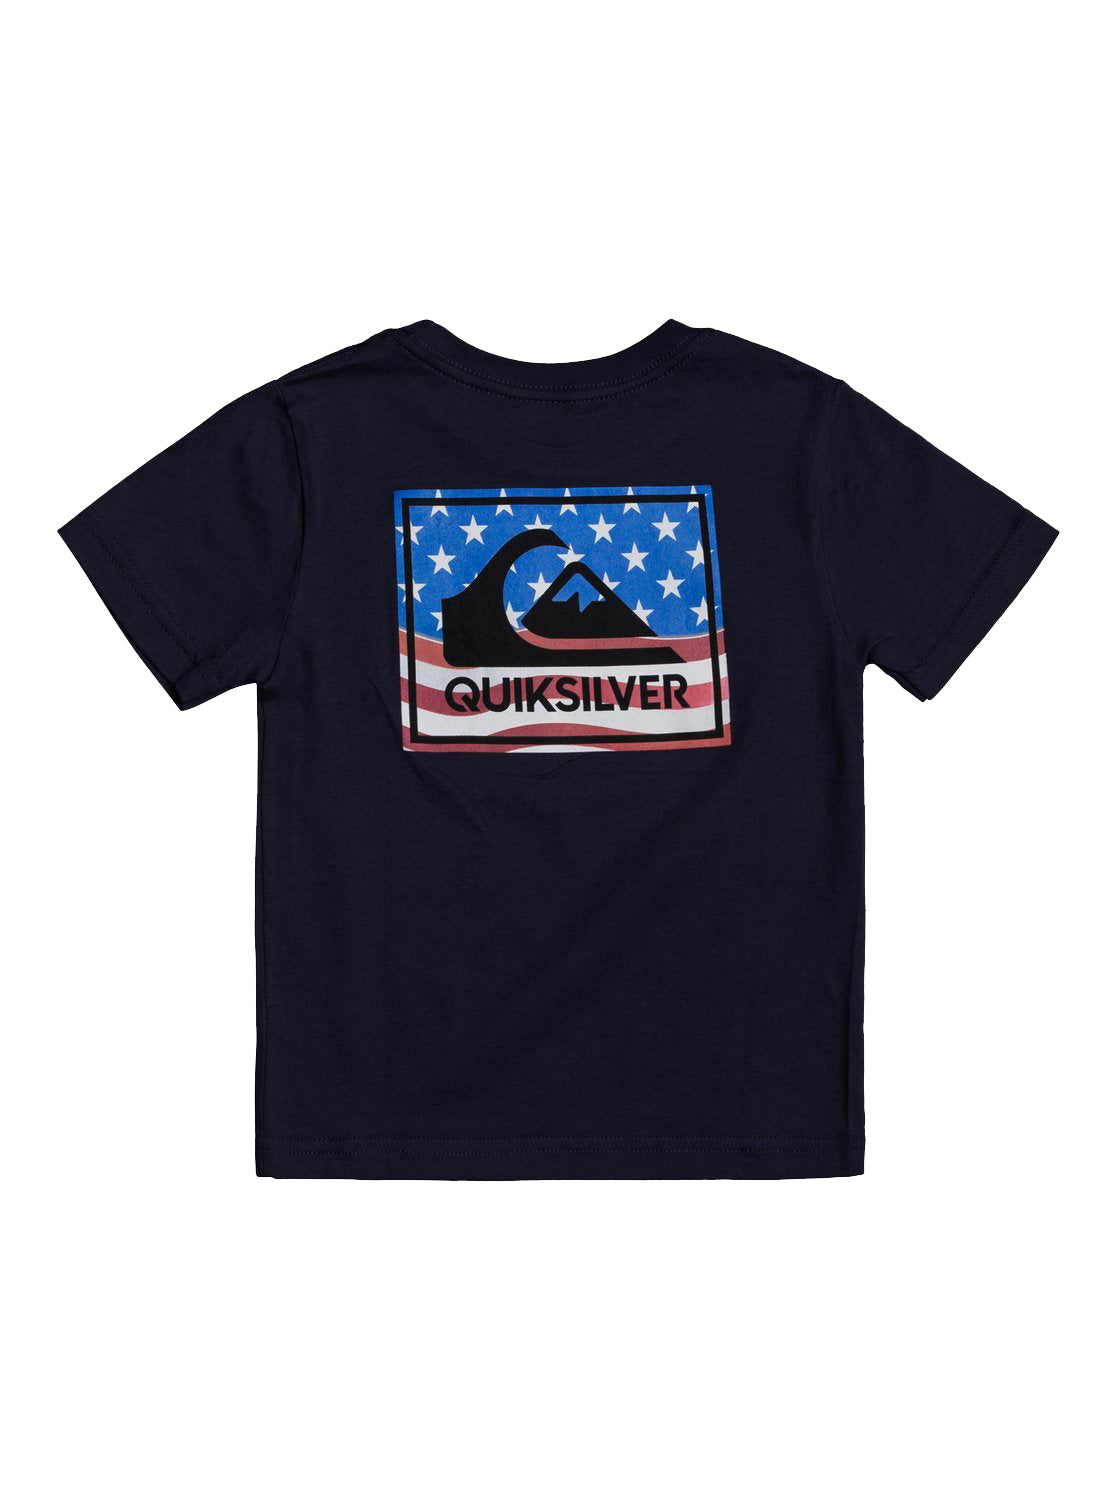 Quiksilver Architexure Youth Tee BYJ0 3